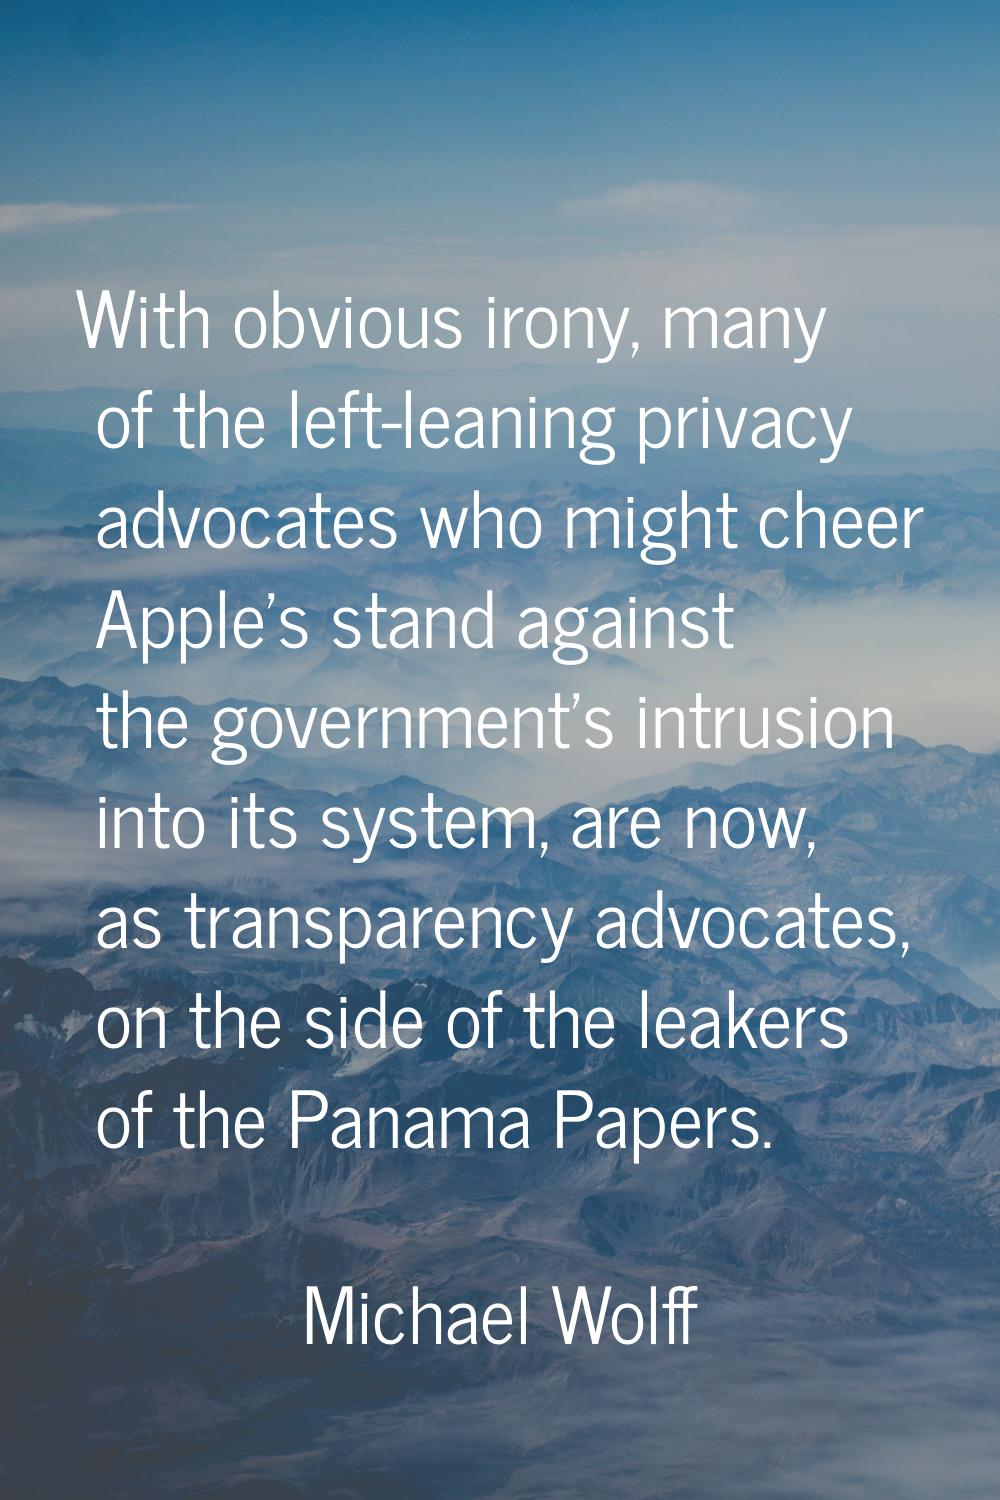 With obvious irony, many of the left-leaning privacy advocates who might cheer Apple's stand agains